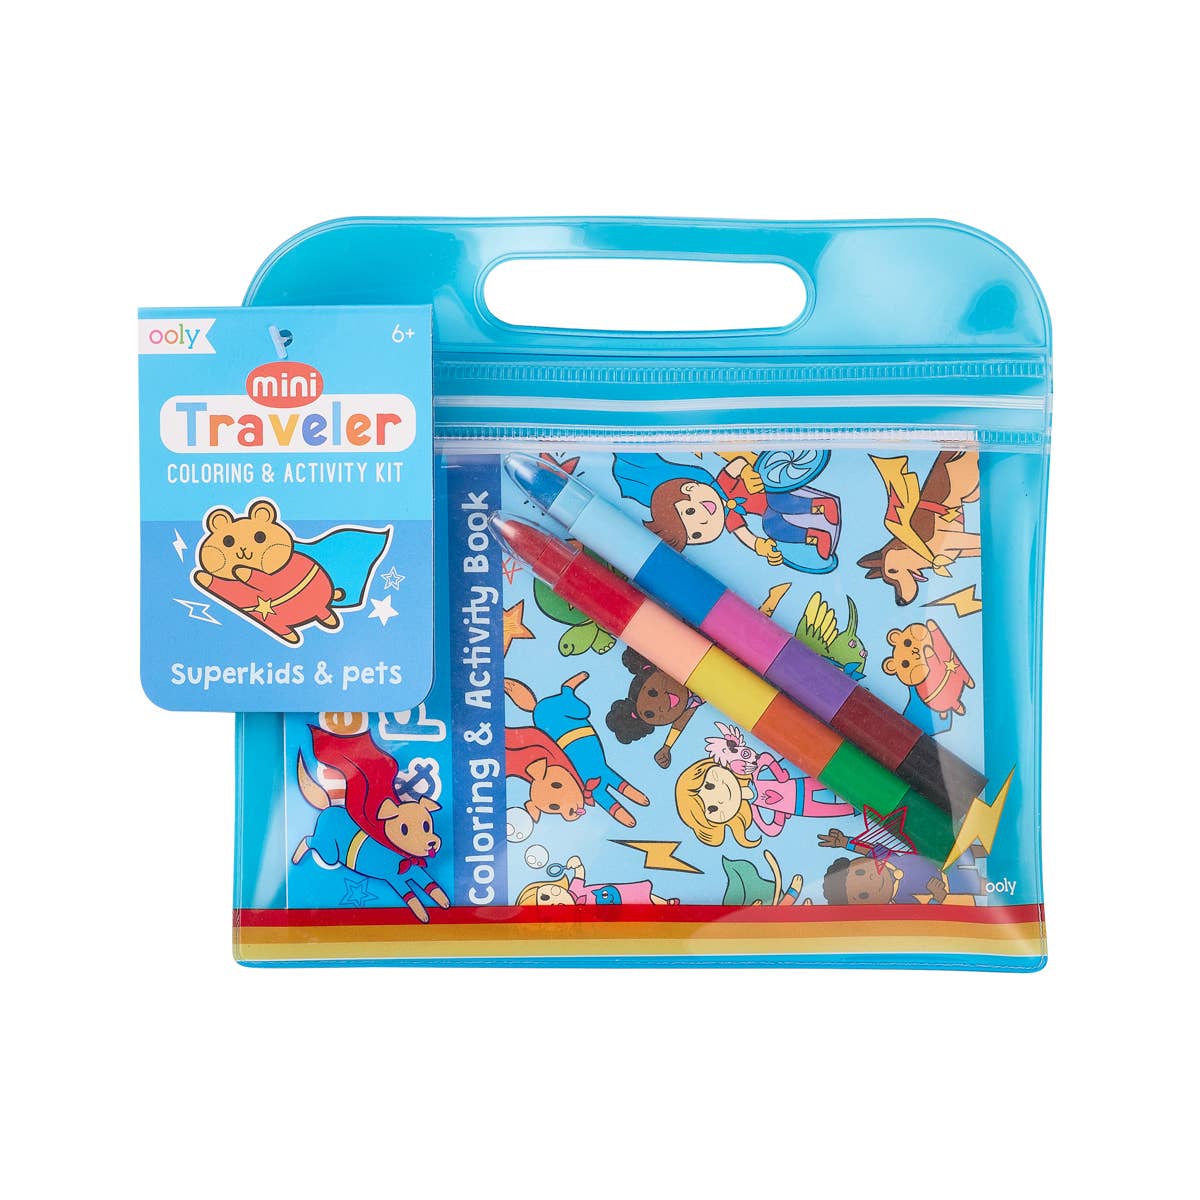 OOLY - Mini Traveler Coloring + Activity Kit - Superkids & Pets